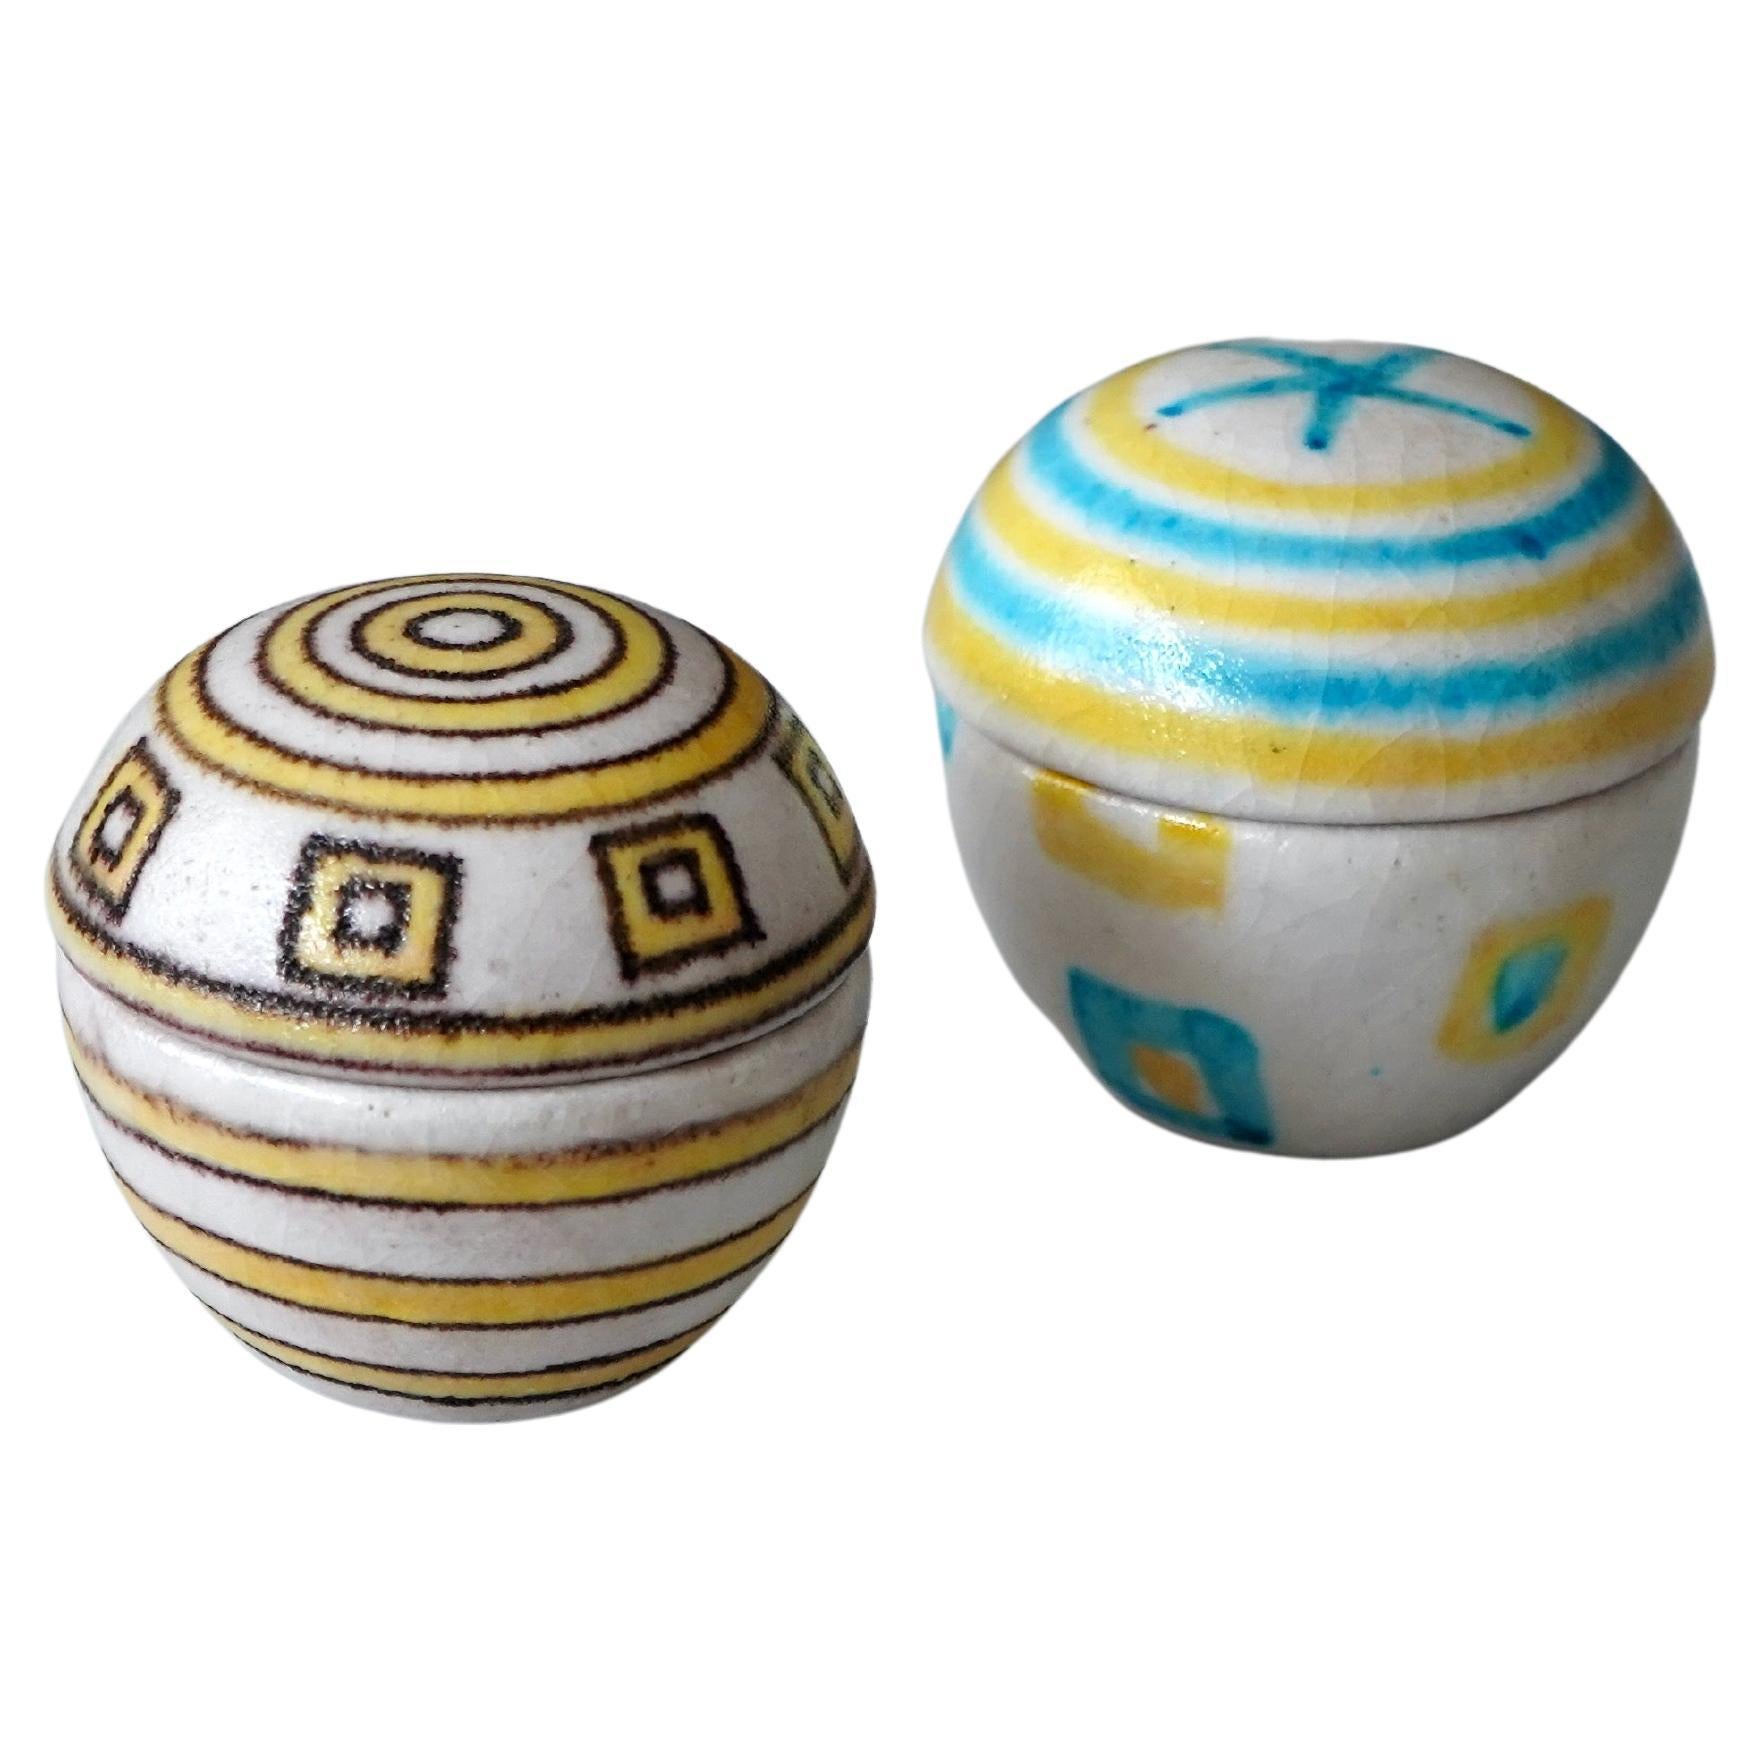 Unique Lidded Ceramic Boxes by Guido Gambone. Florence, Italy, 1950s